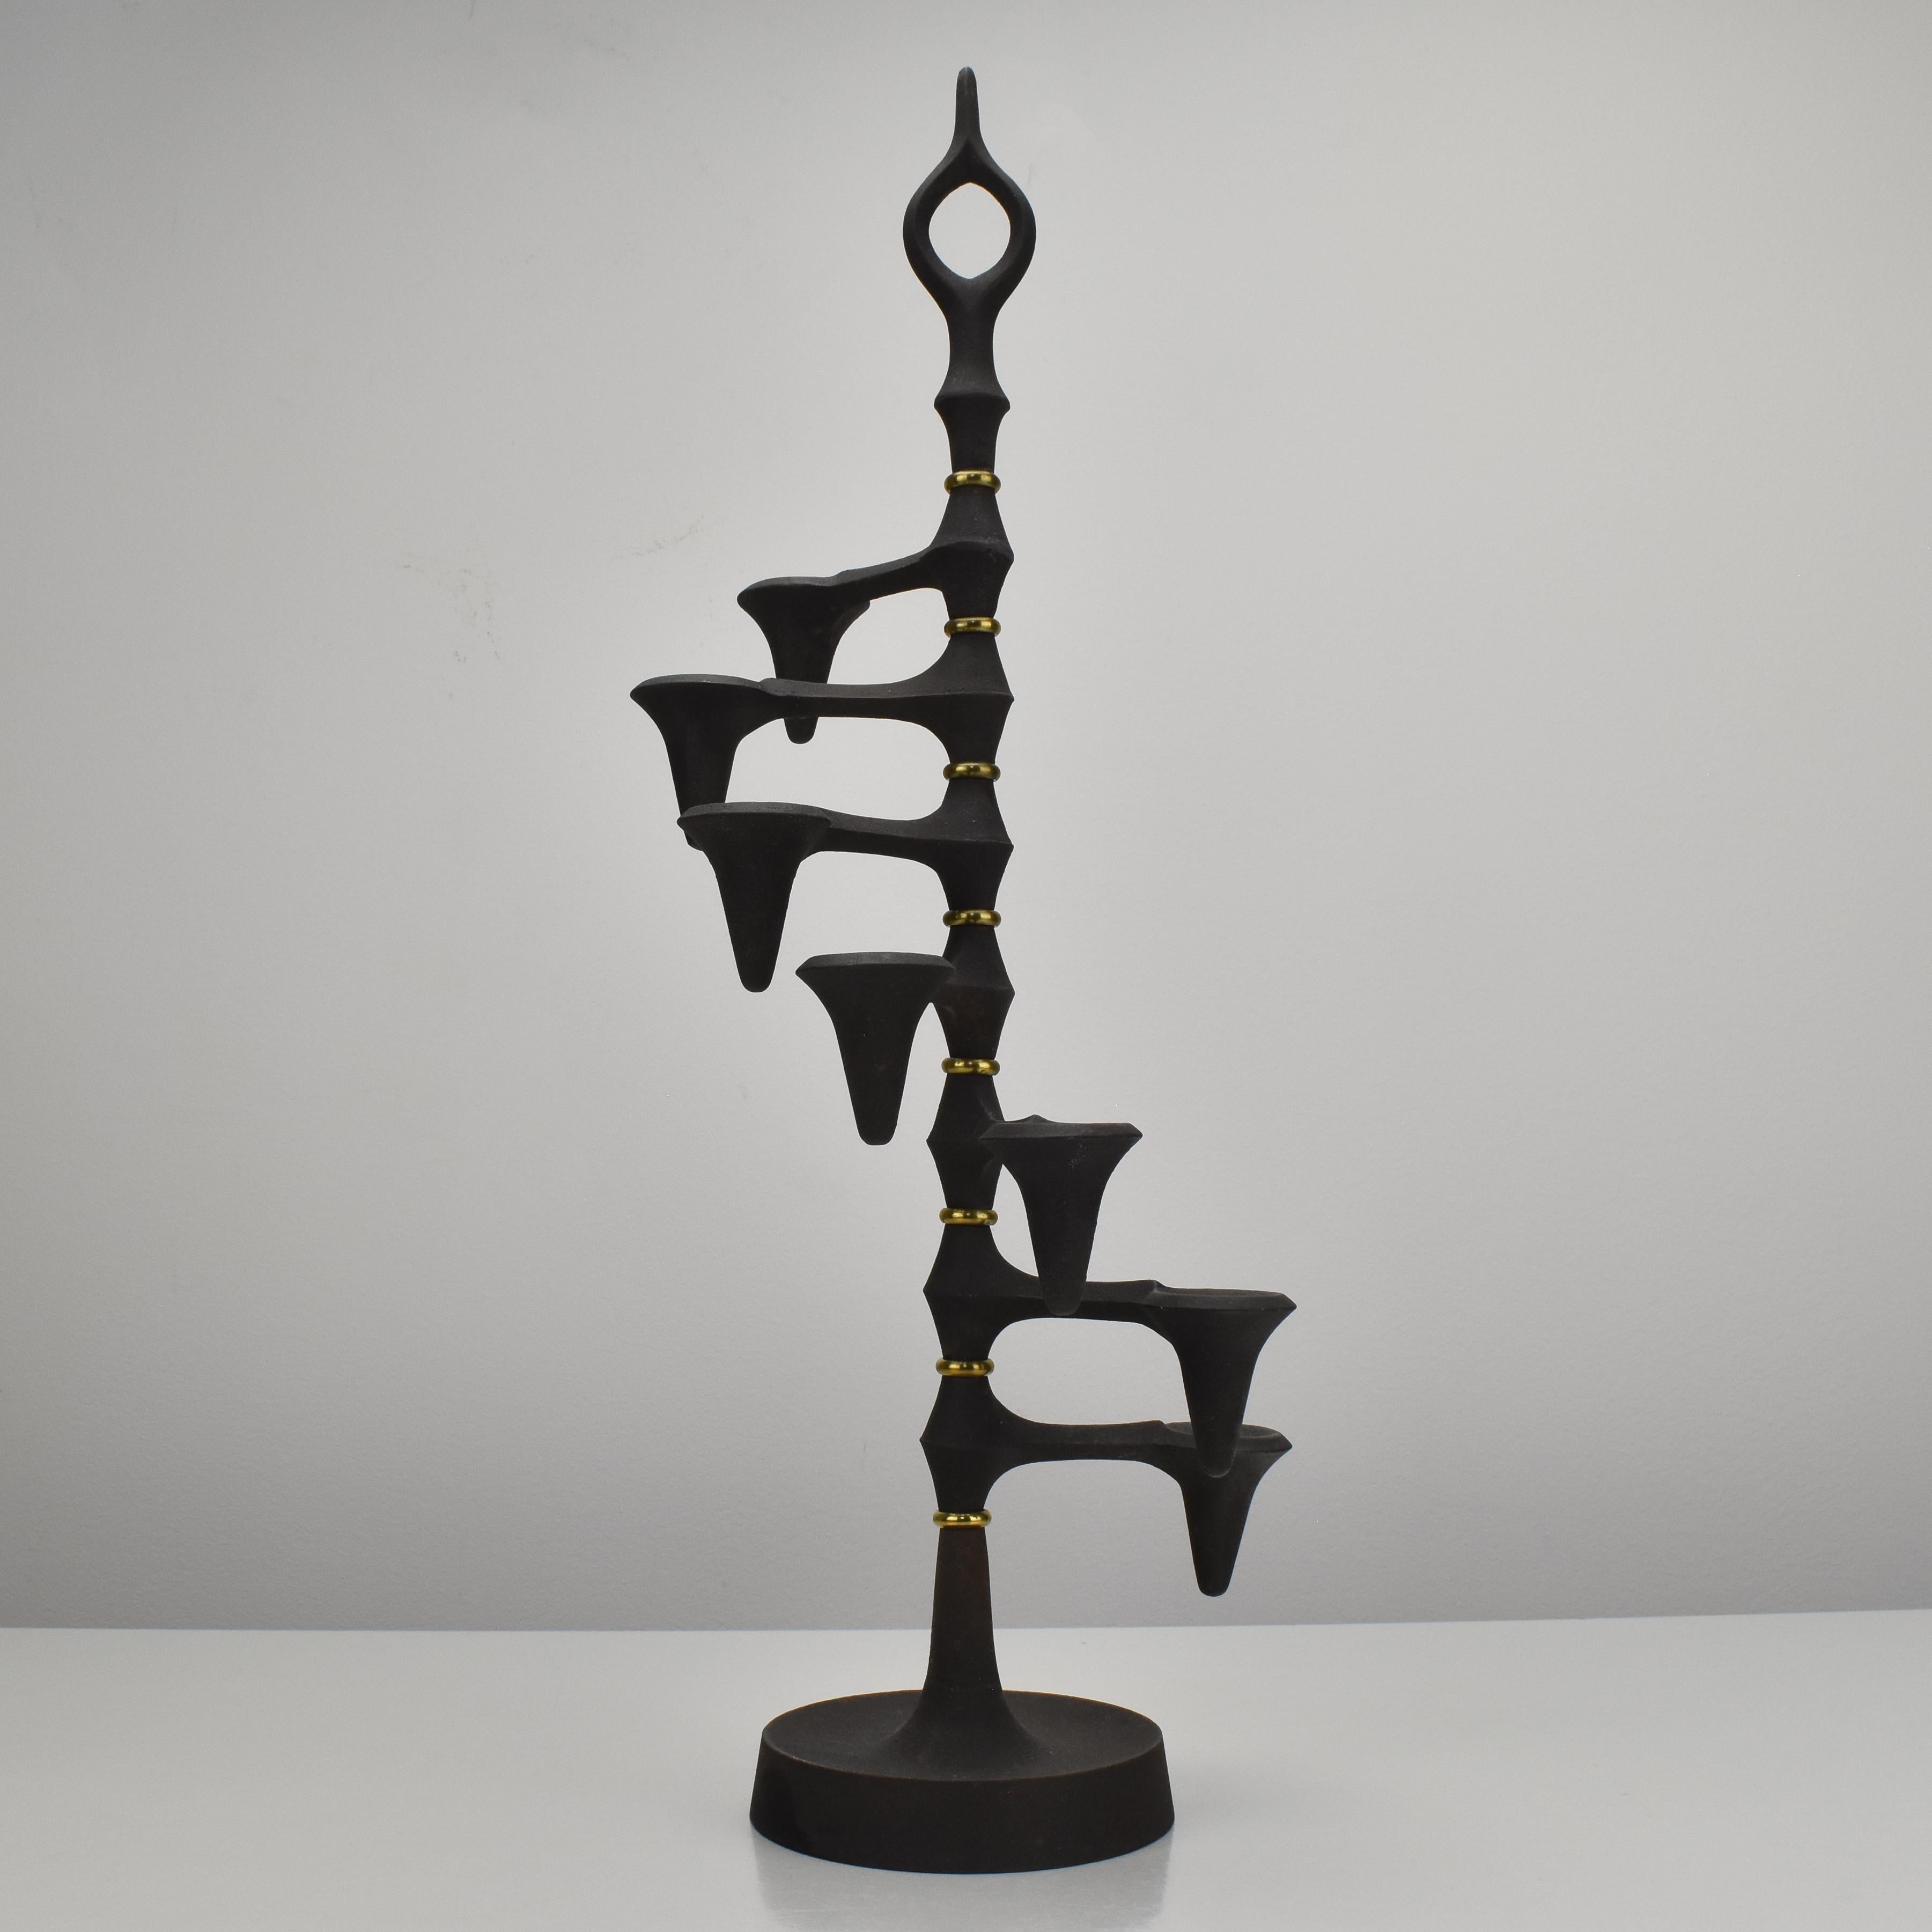 
Bring a touch of mid-century modern elegance to your home with this iconic Jens Quistgaard candelabra, designed in the 1960s.

Crafted from cast iron and brass, this sculptural piece exudes a bold and sophisticated presence. Its seven adjustable